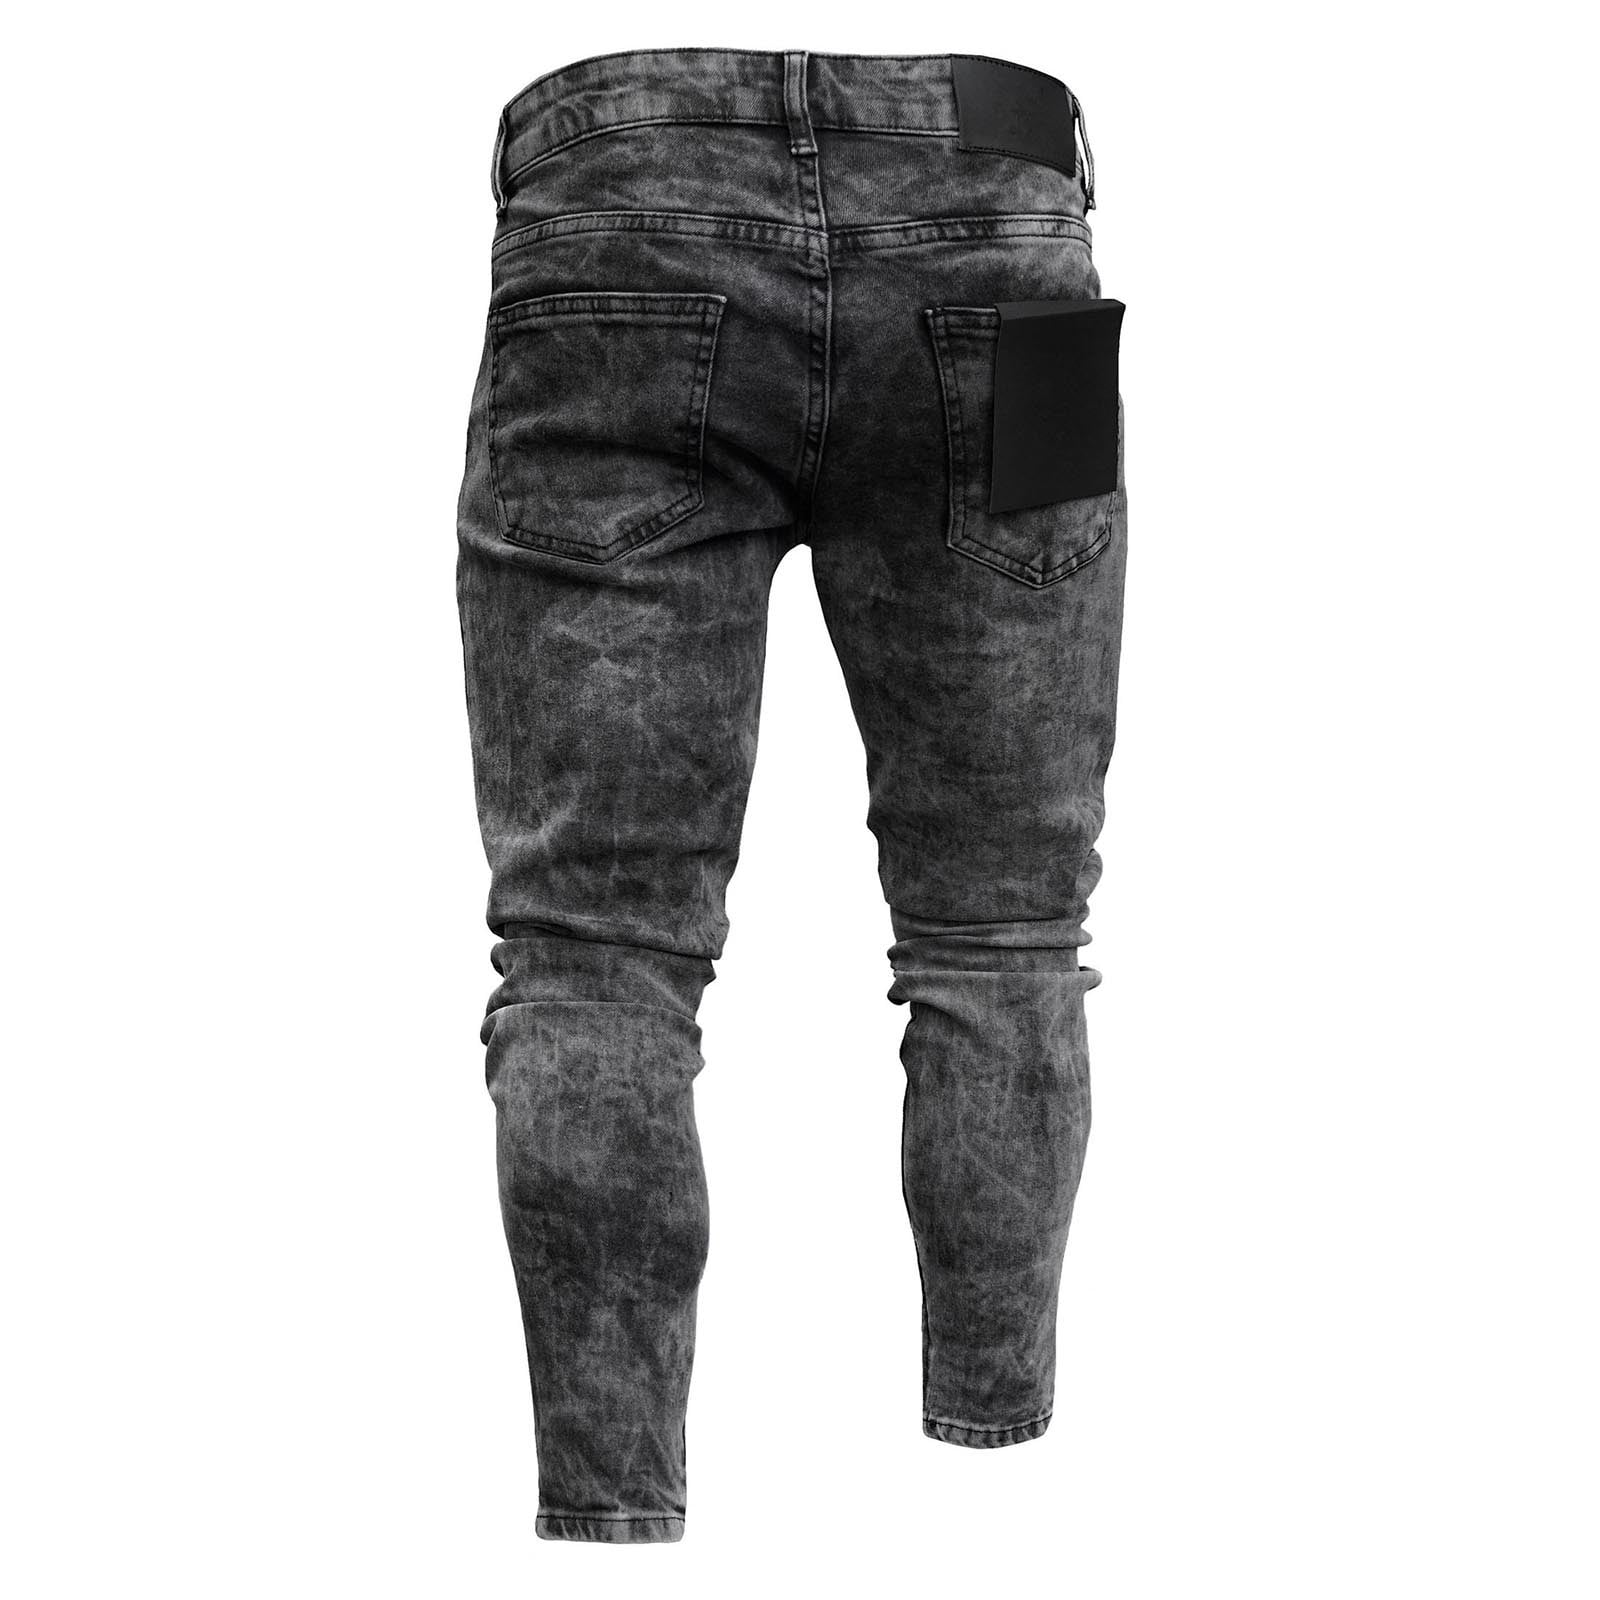 ZXHACSJ European And American Spring And Autumn Jeans Men's Side Pocket  Skinny Jeans Black XXL